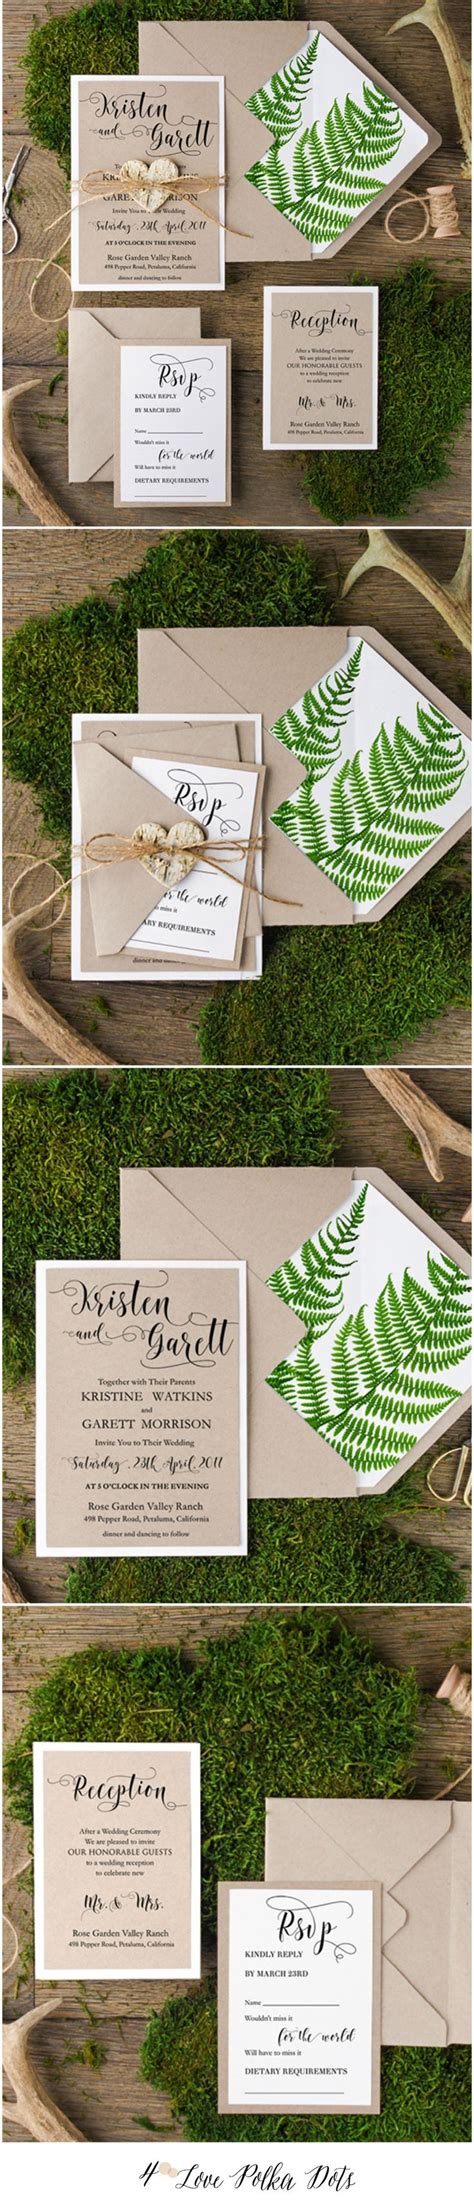 Rustic Wedding Invitations Forest Invites Personalized Fern Stationery | Wedding party invites ...